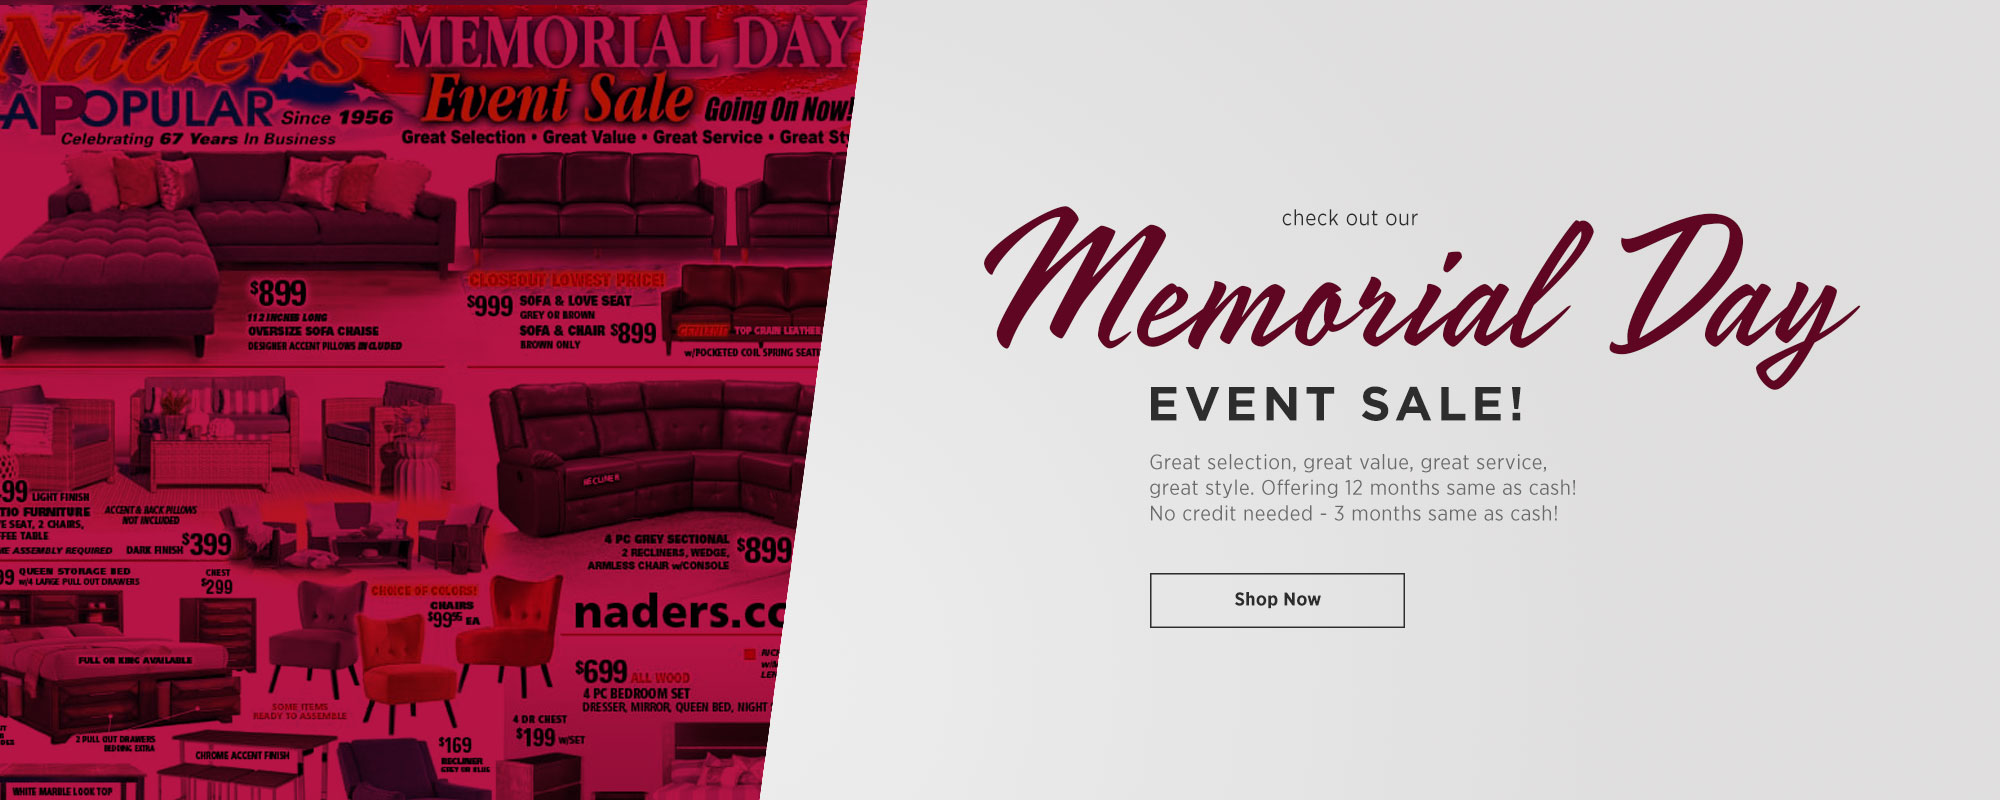 View Our Memorial Event Sale Ad